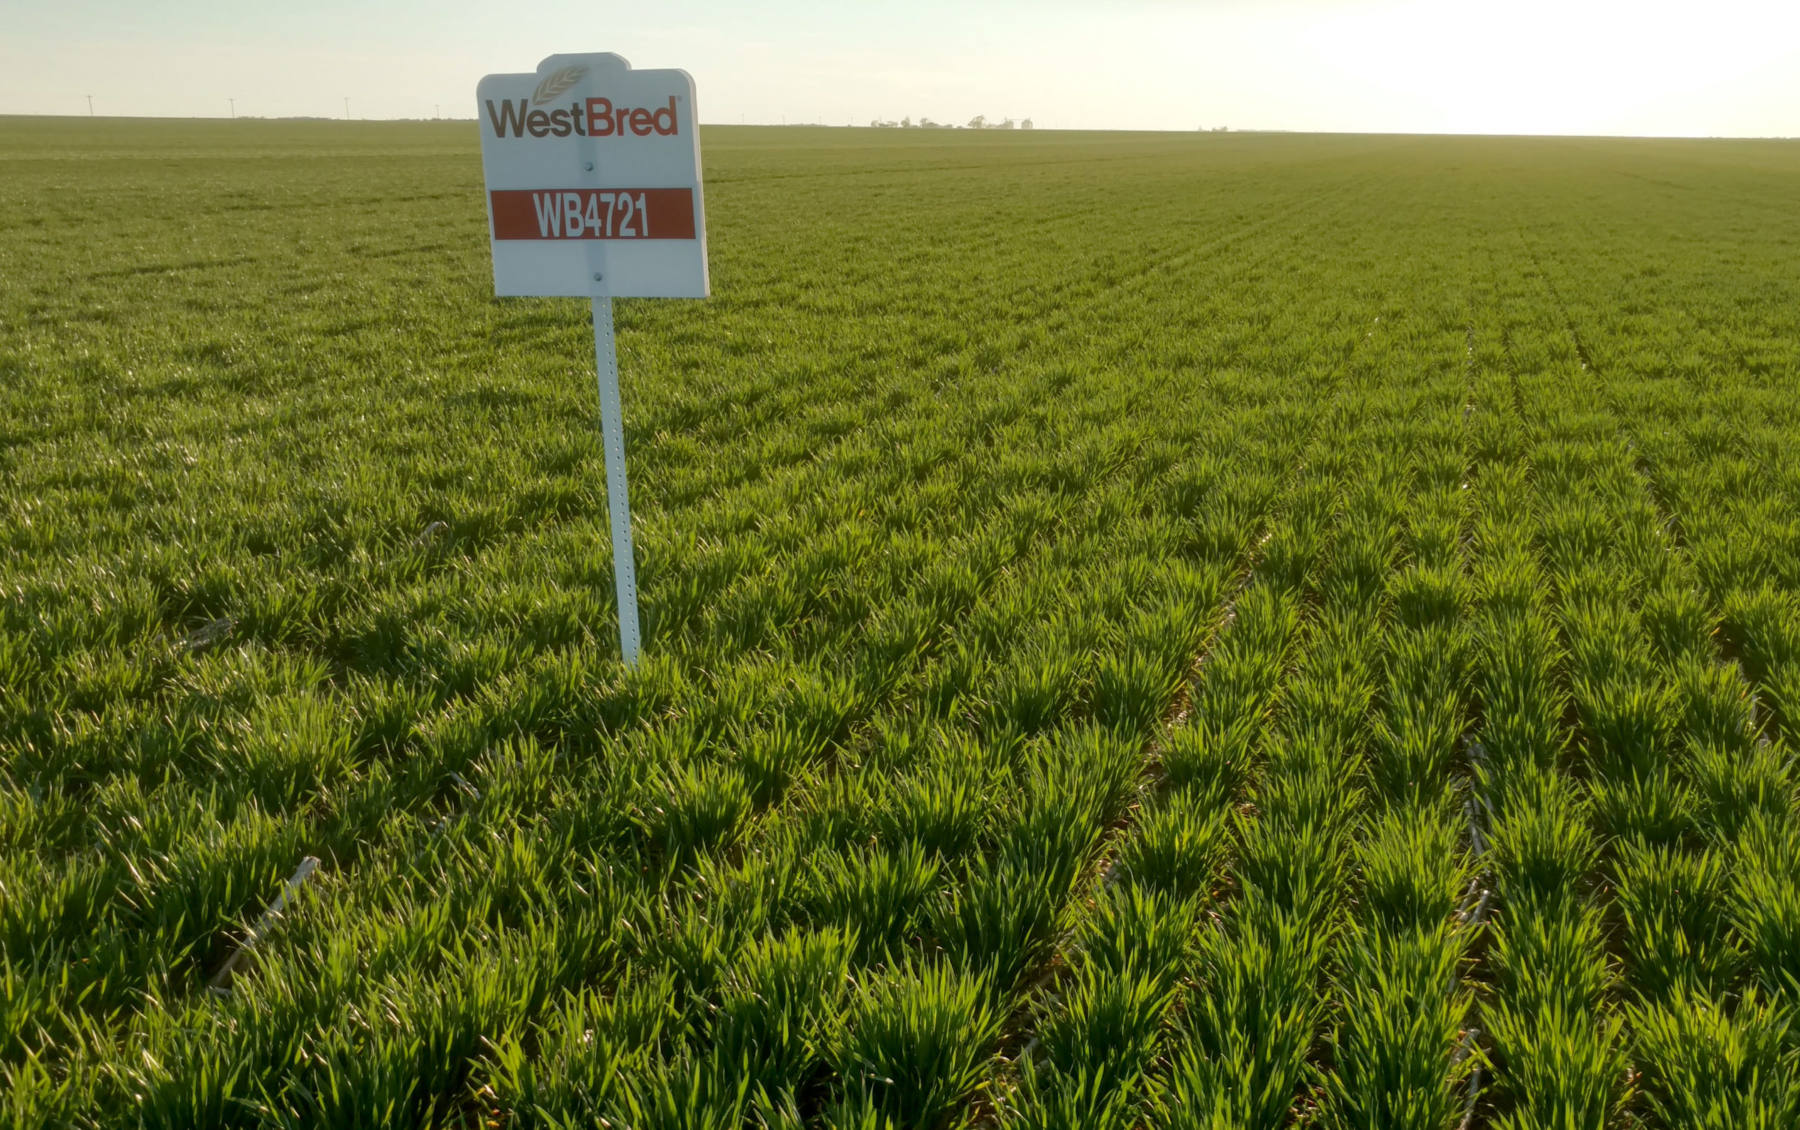 A variety sign next to a field of wheat.